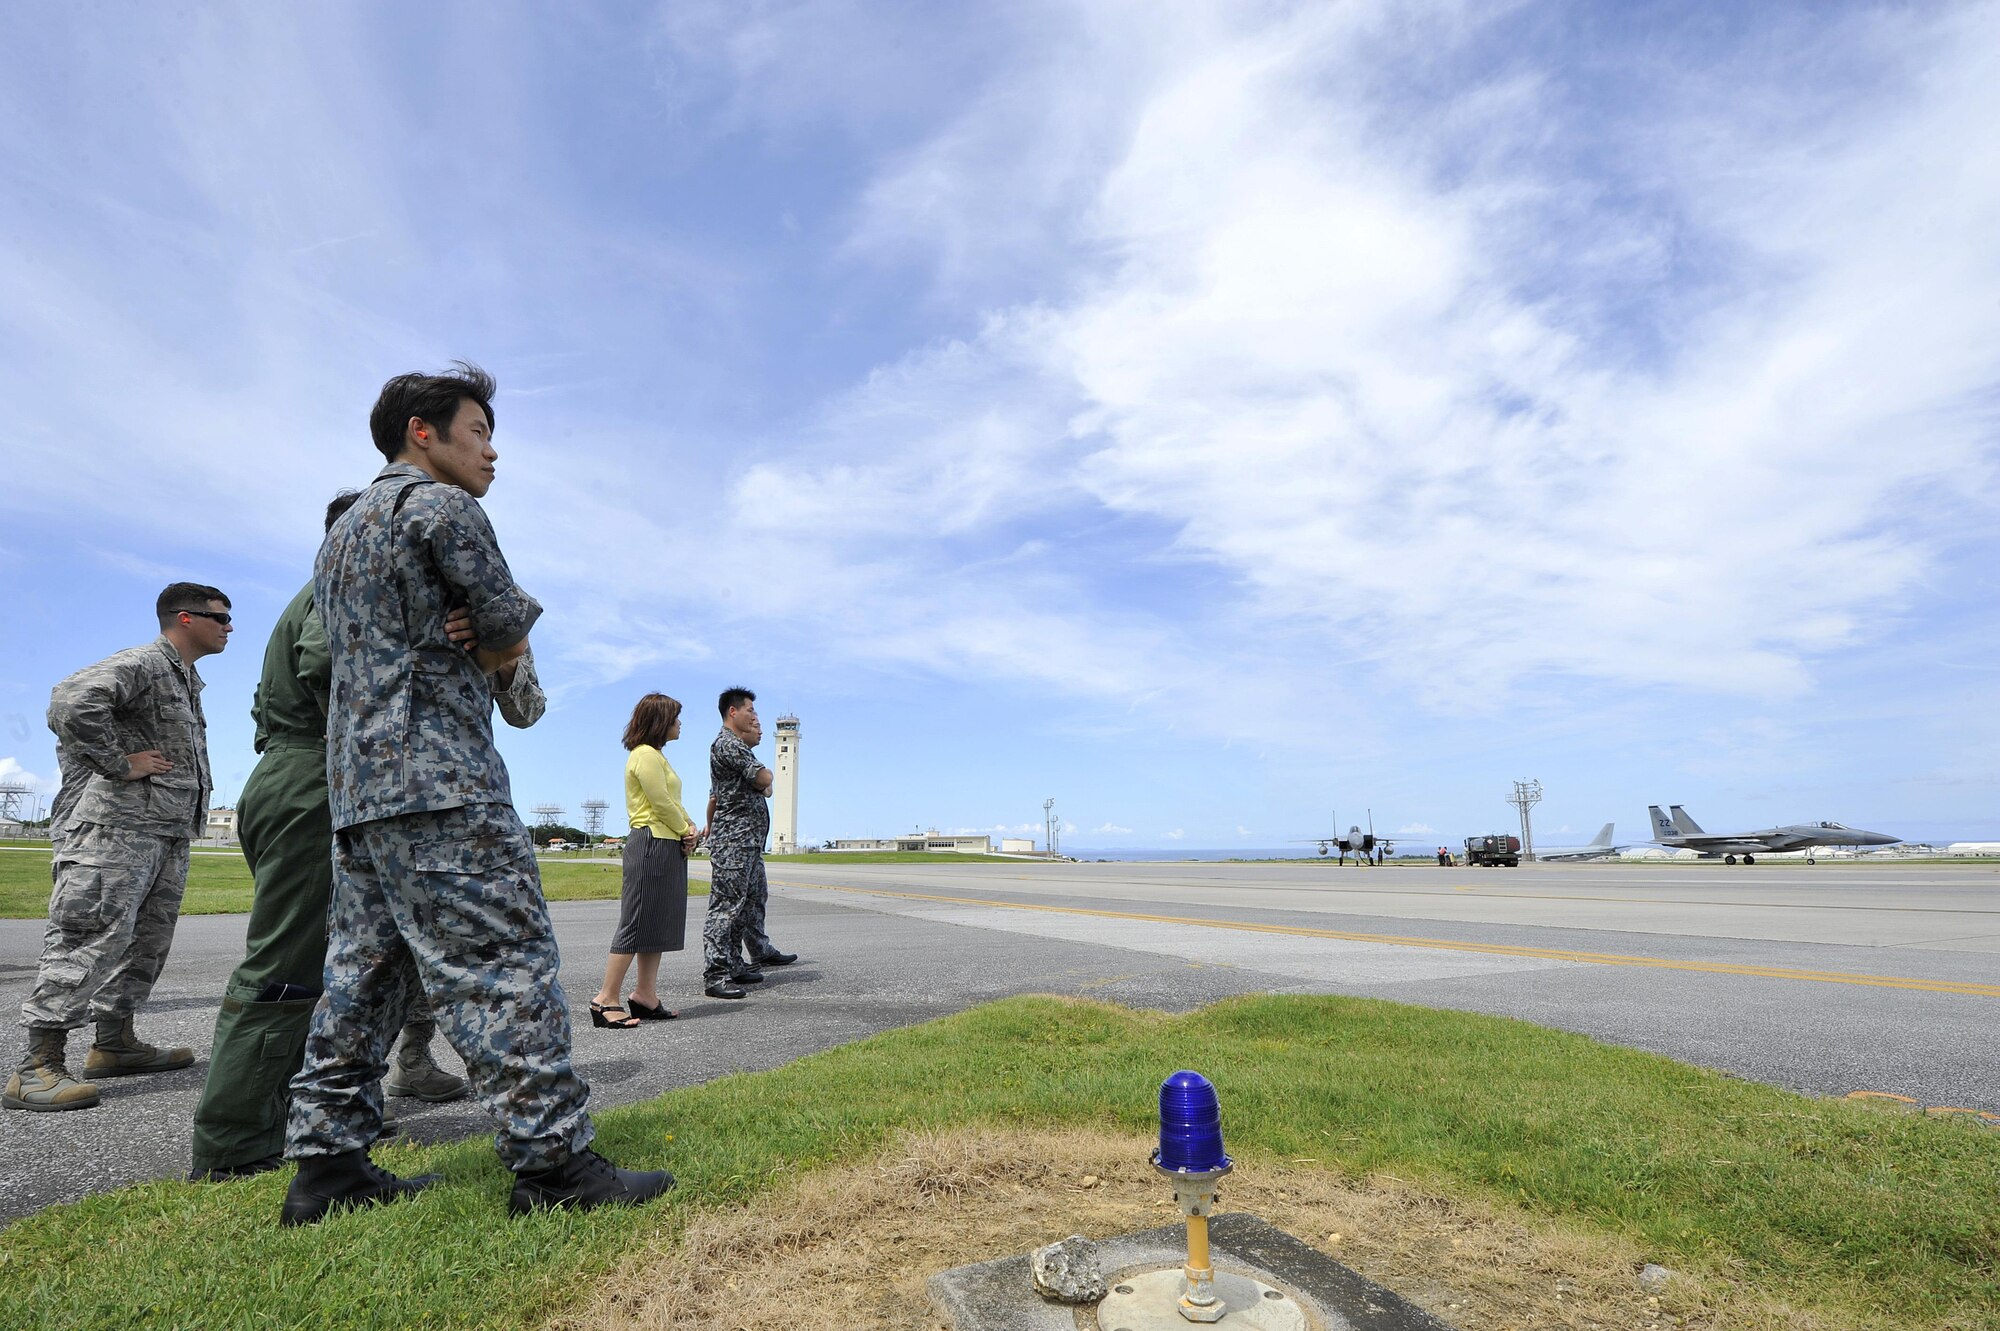 Japan Air Self Defense Force officers from Naha Air Base, Okinawa, observe the 18th Logistics Readiness Squadron fuels flight distribute to F-15 Eagles during their tour, July 21, 2016, at Kadena Air Base, Japan. The 18th LRS and JASDF officers toured the Kadena Petroleum, oils, and lubricants facilities, Fuel Service Center, and Distribution Management section while also observing hot pit refueling operations. (U.S. Air Force photo by Naoto Anazawa)